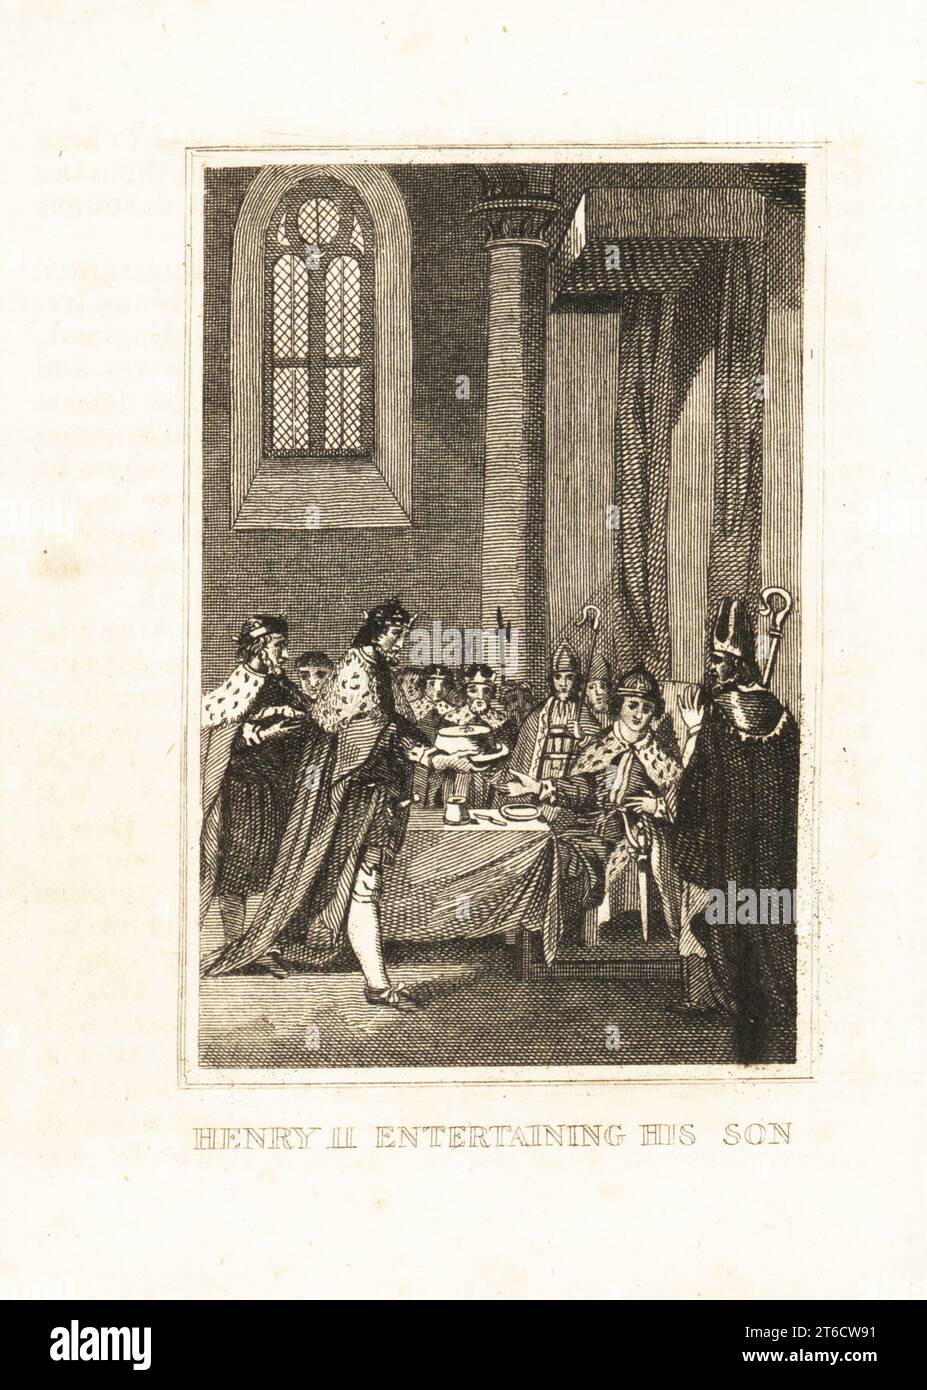 Henry the Young King at his coronation banquet, 1170. His father King Henry II serves him a dish, while bishops and nobles in ermine watch. Henry II entertaining his son. Copperplate engraving from M. A. Jones History of England from Julius Caesar to George IV, G. Virtue, 26 Ivy Lane, London, 1836. Stock Photo